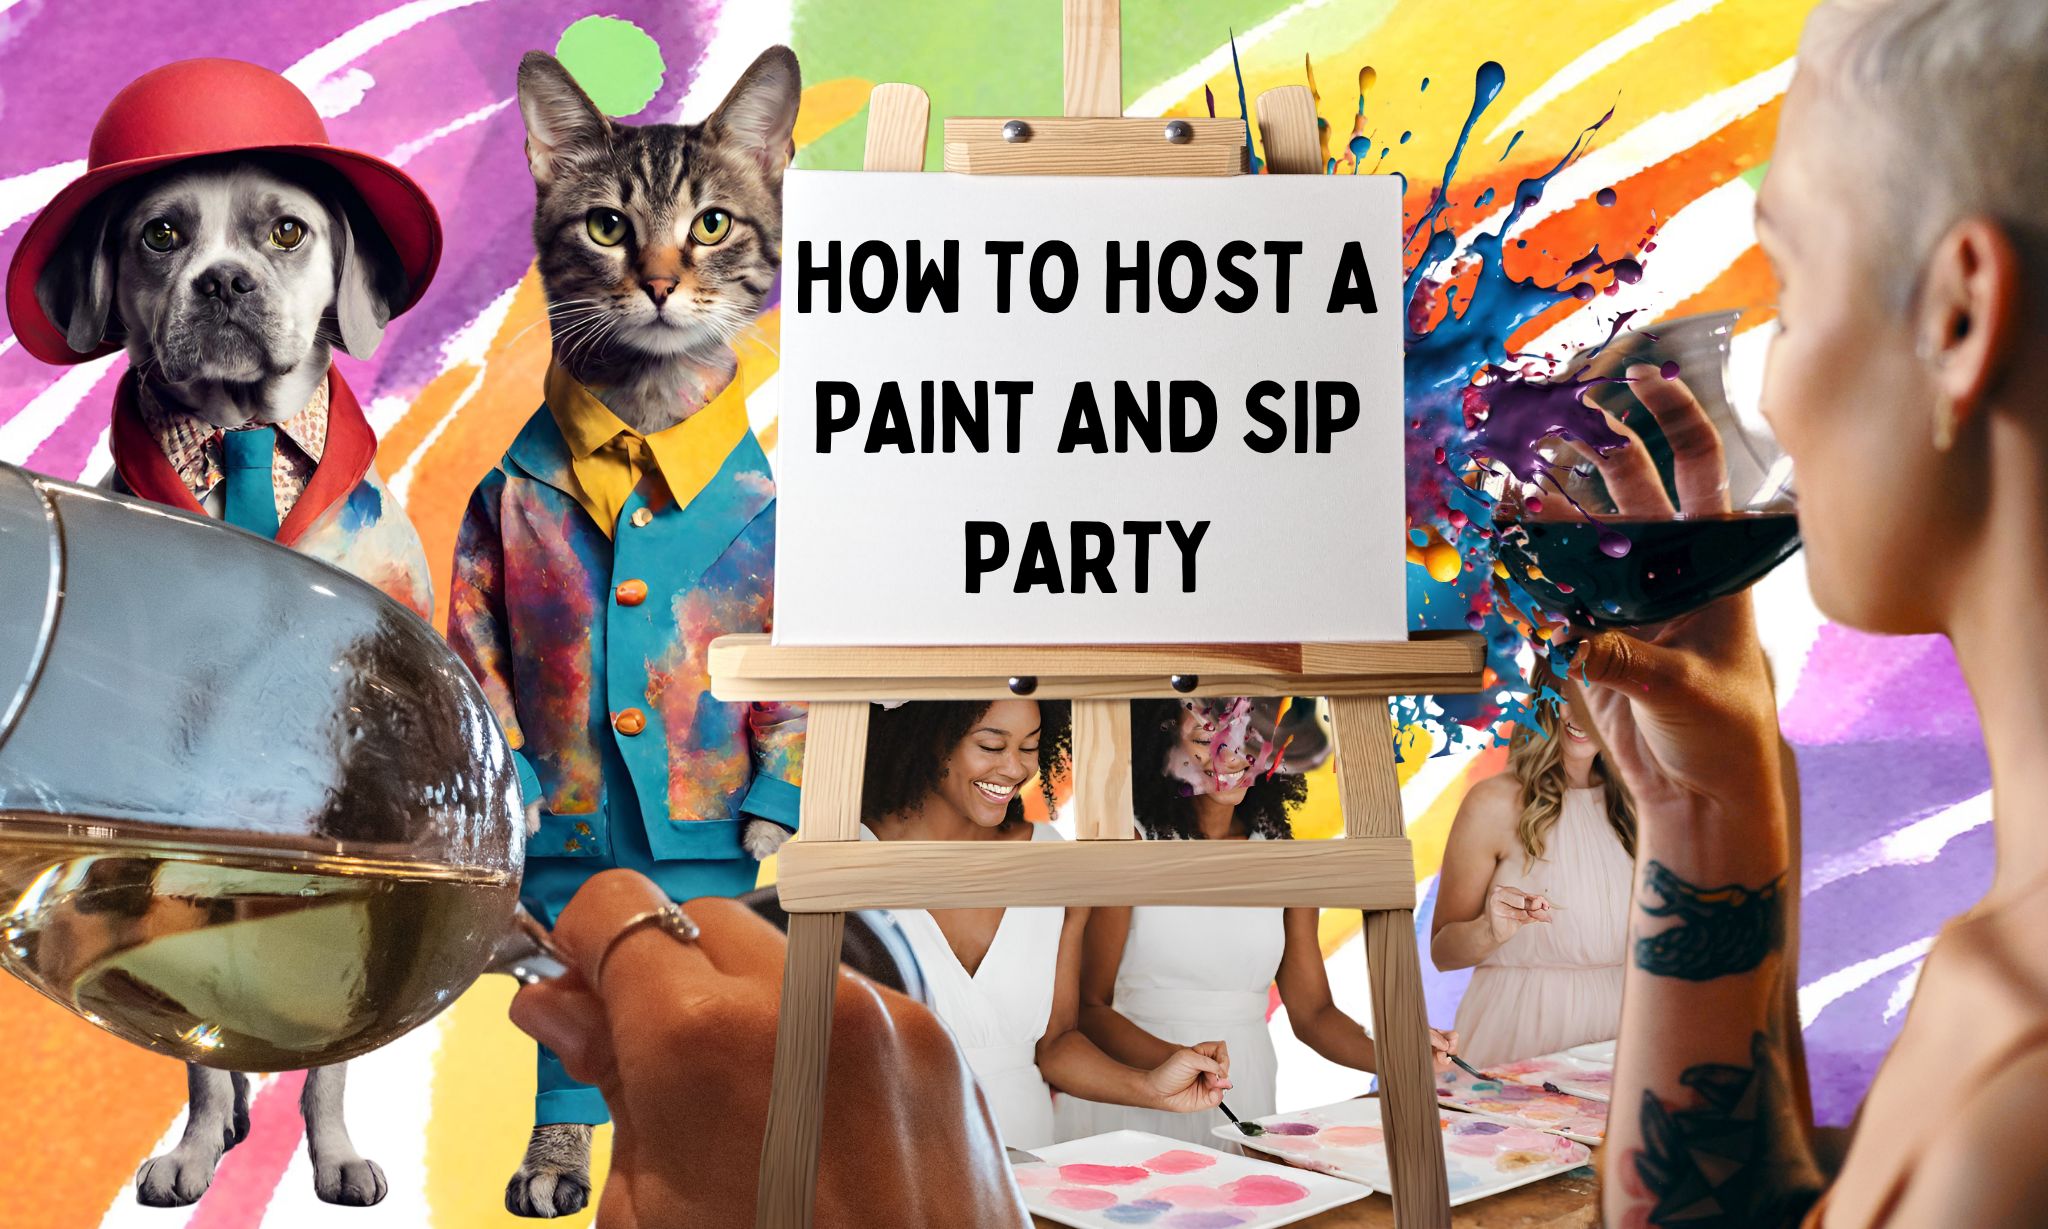 How to host a paint and sip party